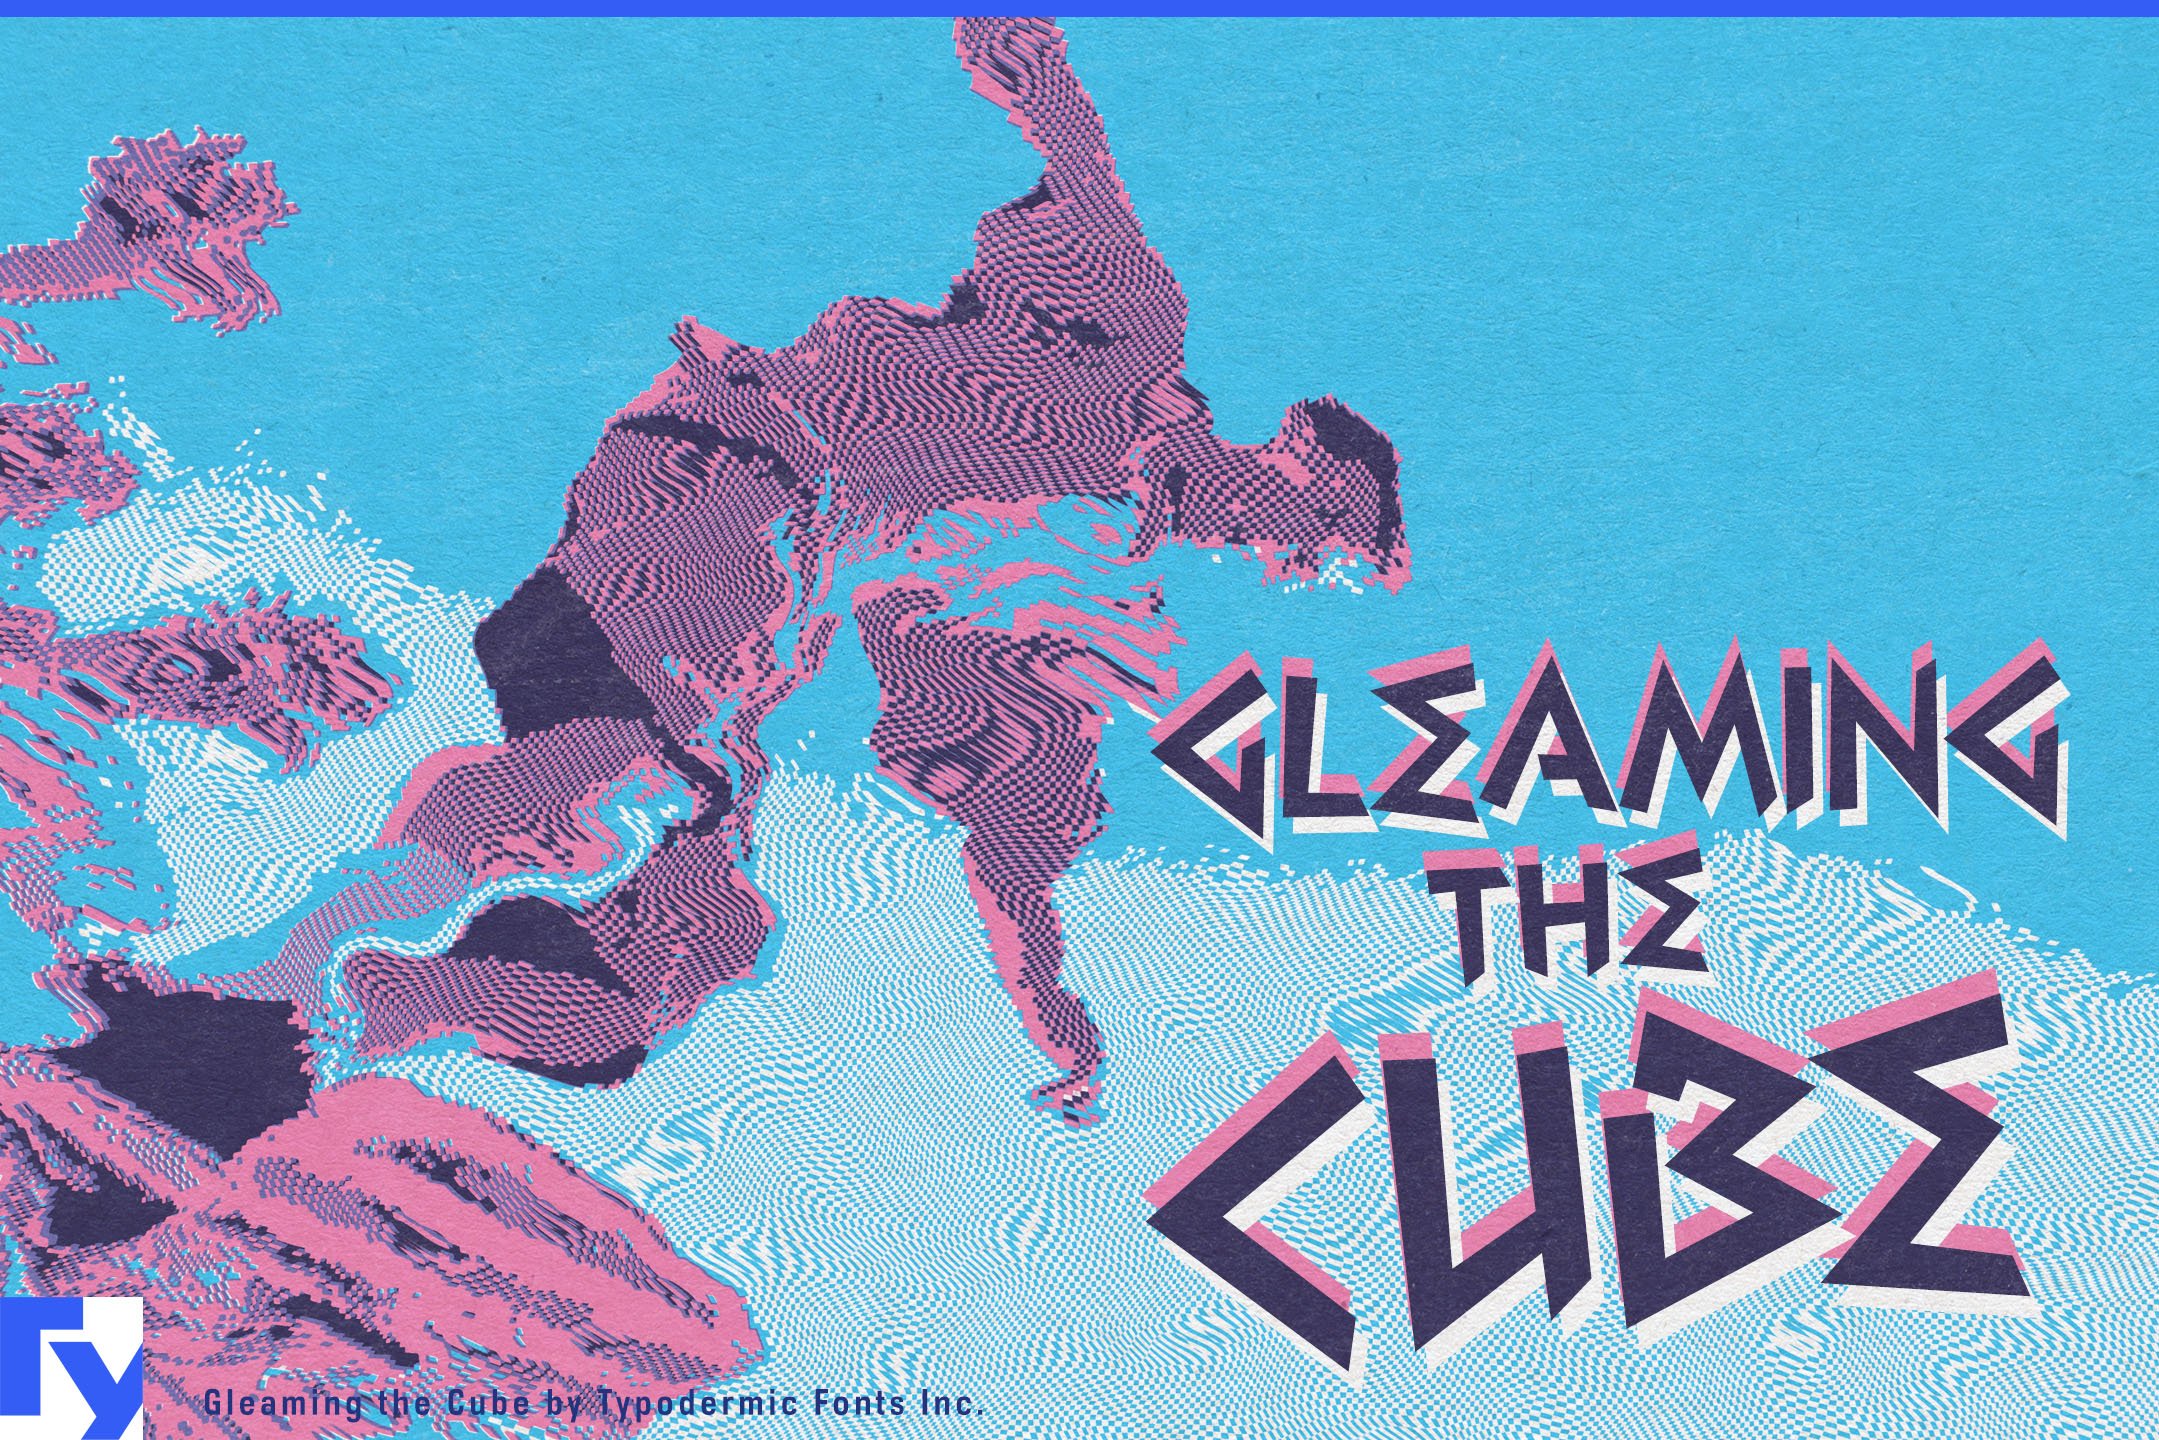 Gleaming the Cube cover image.